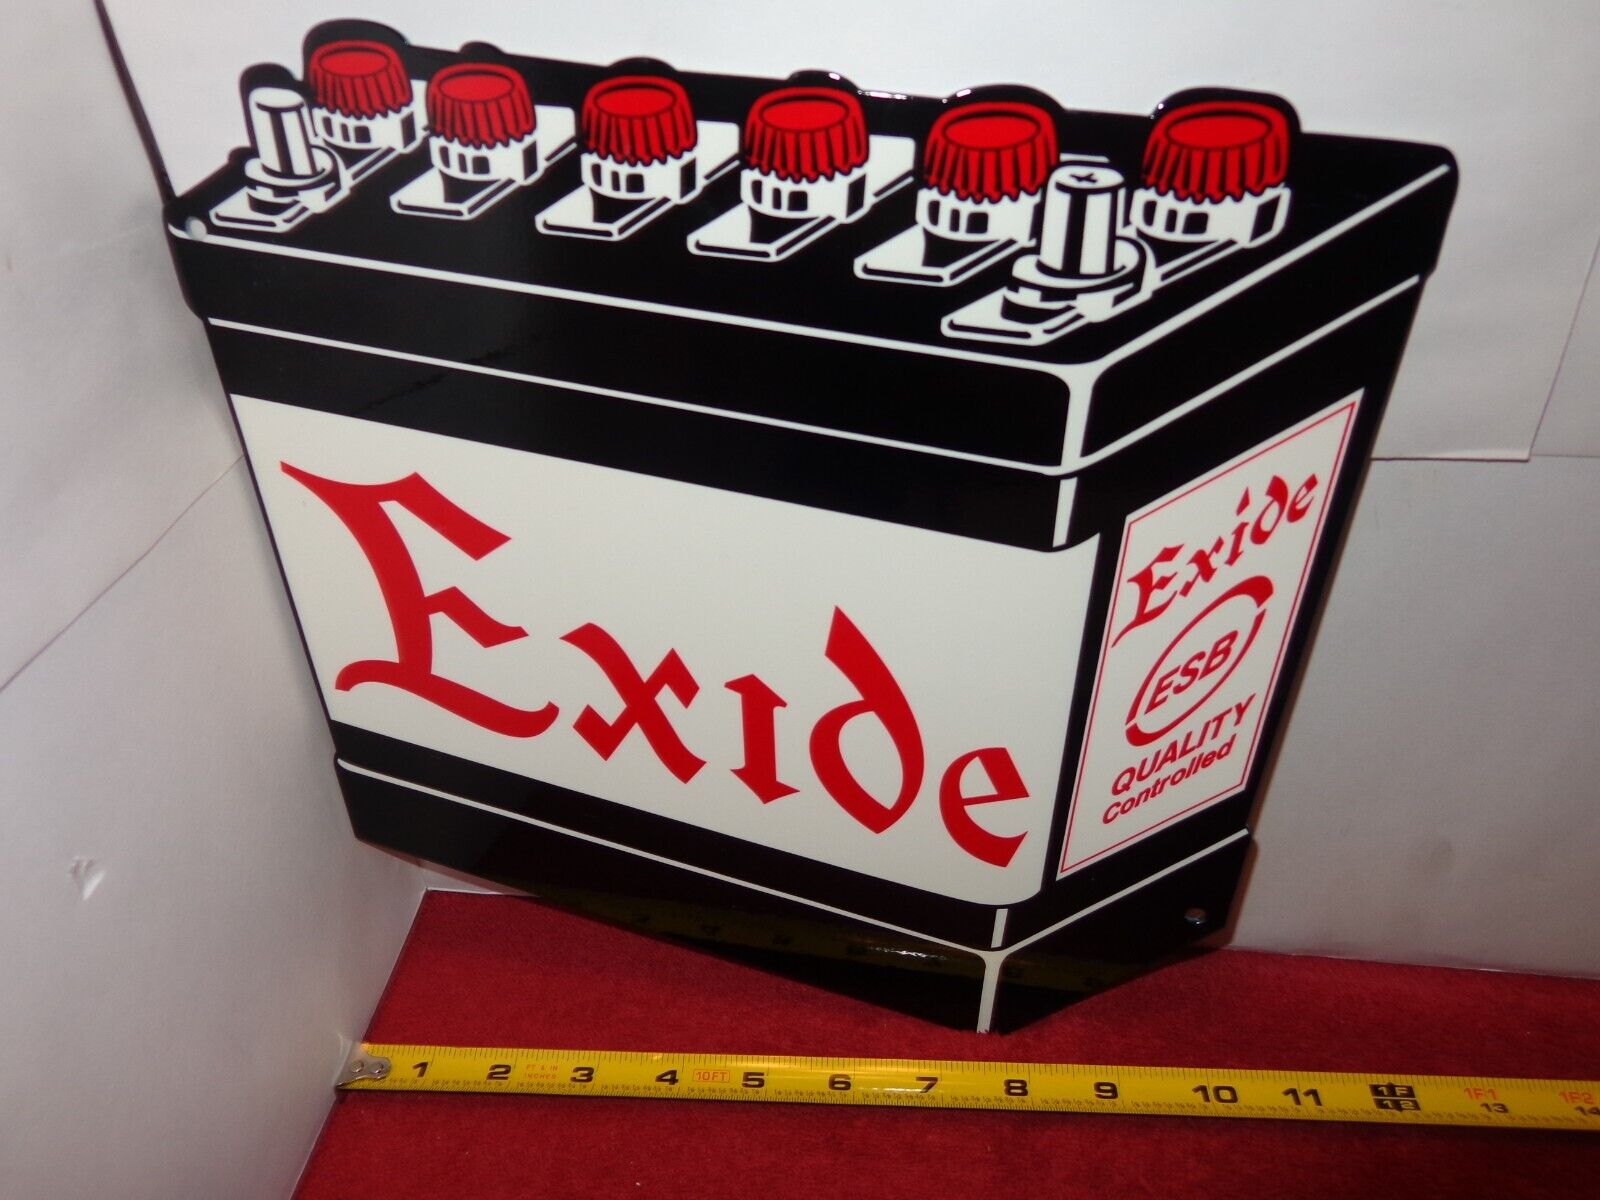 10 x 10 in EXIDE QUALITY CONTROLLED BATTERY ADV. SIGN HEAVY DIE CUT METAL # S 94